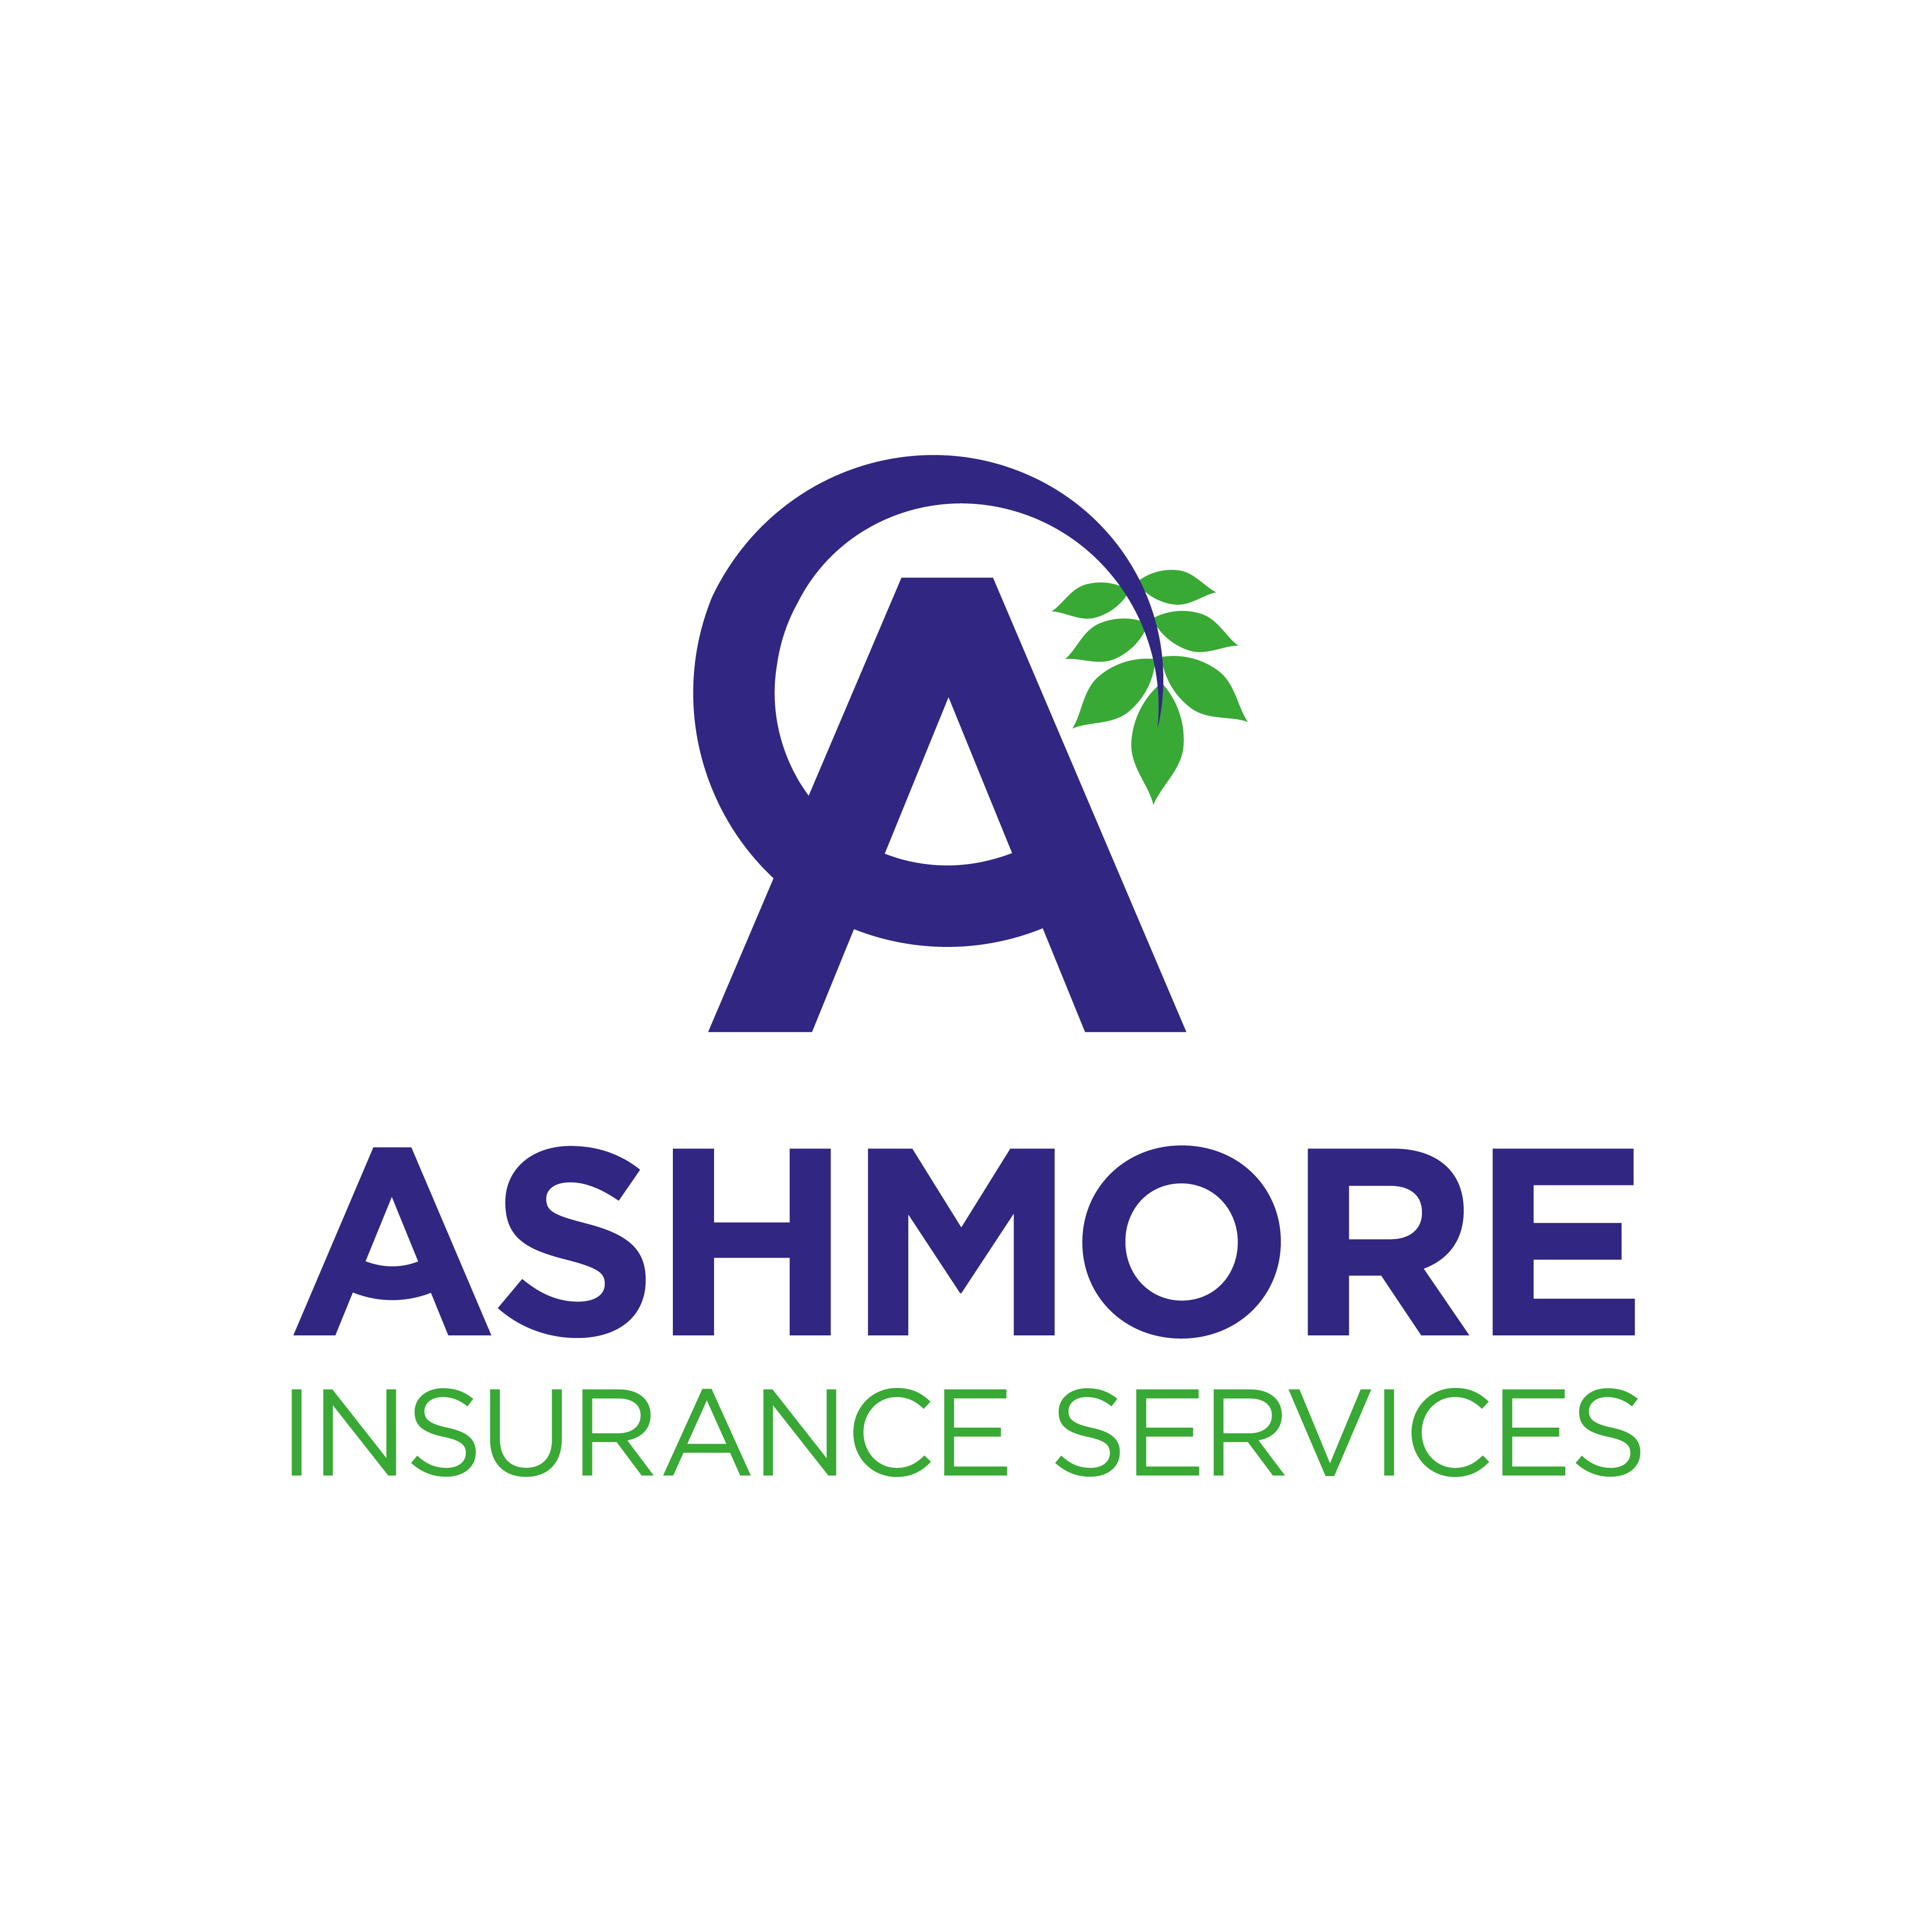 Ashmore Insurance Services logo design by logo designer liamjacksongraphics for your inspiration and for the worlds largest logo competition